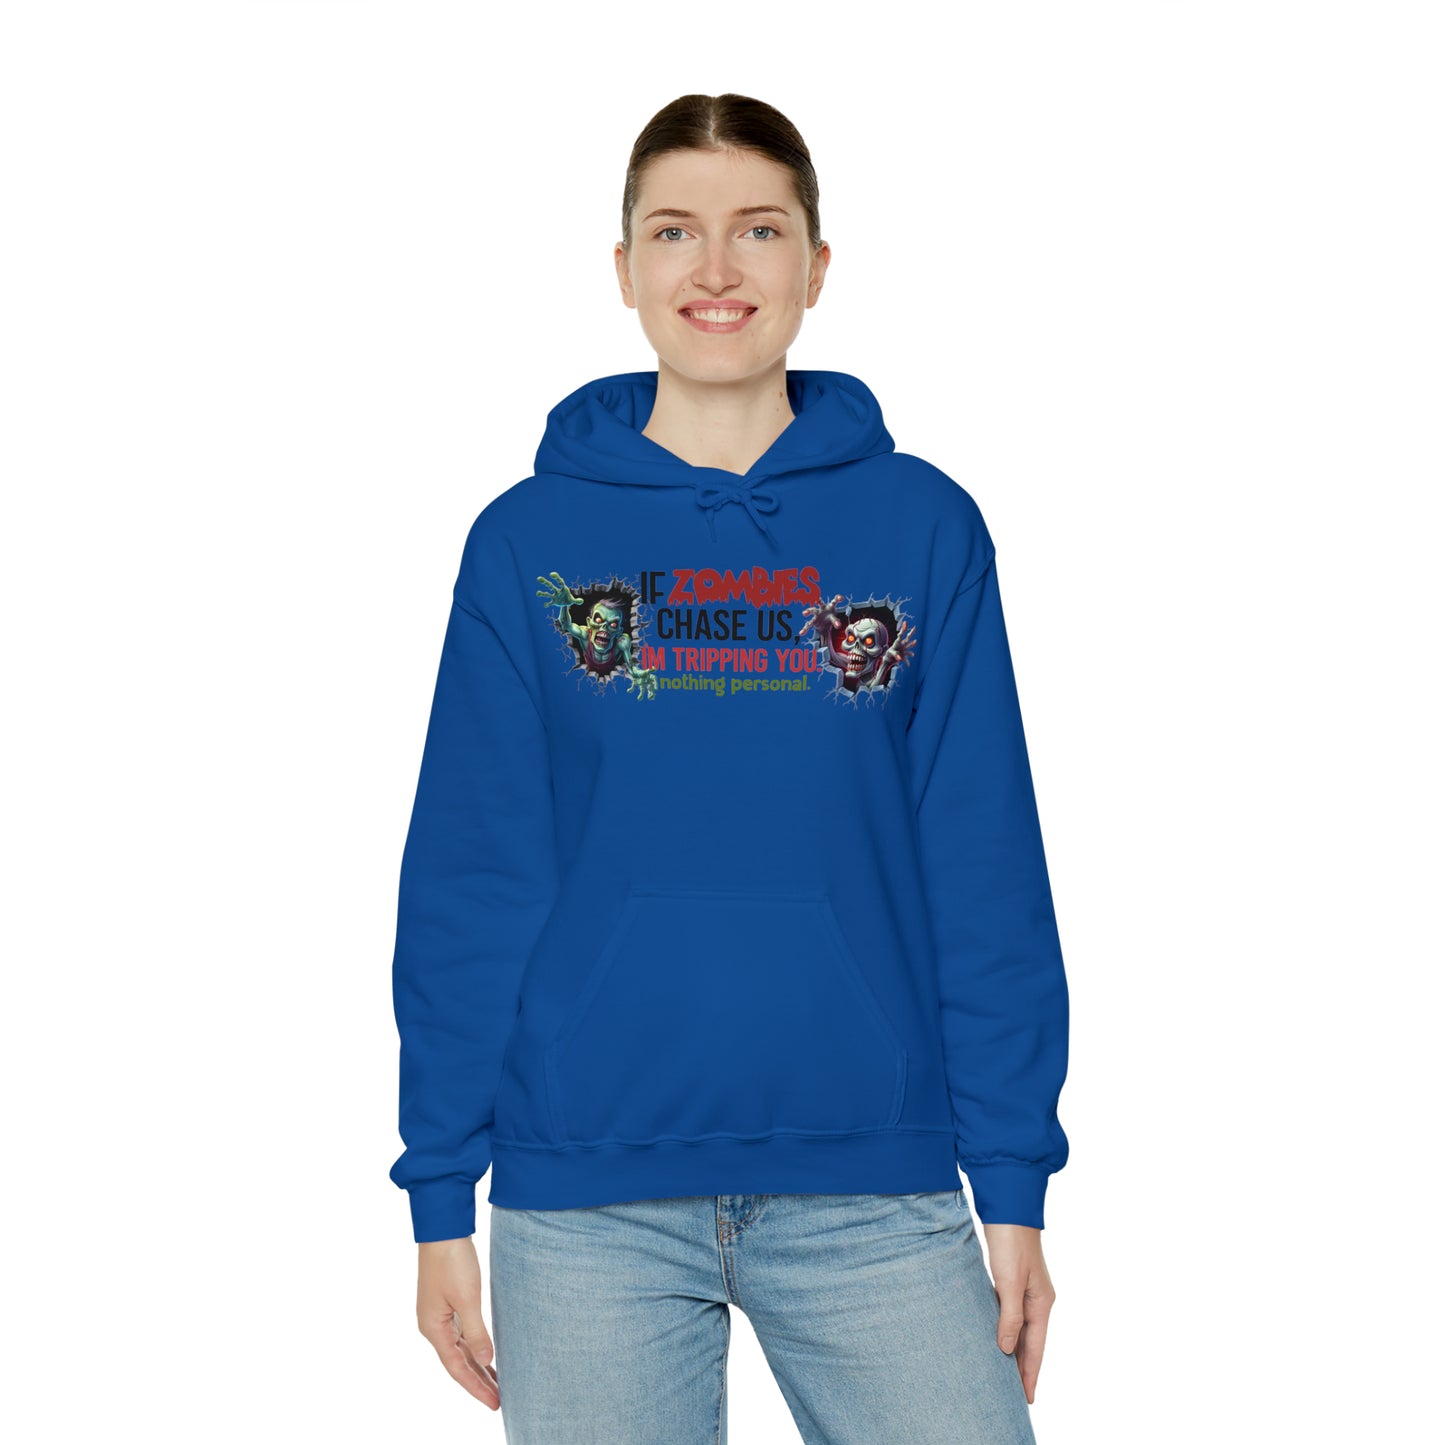 If Zombies Chase Us, I'm Tripping You. Nothing Personal: Unisex Heavy Blend™ Hooded Sweatshirt